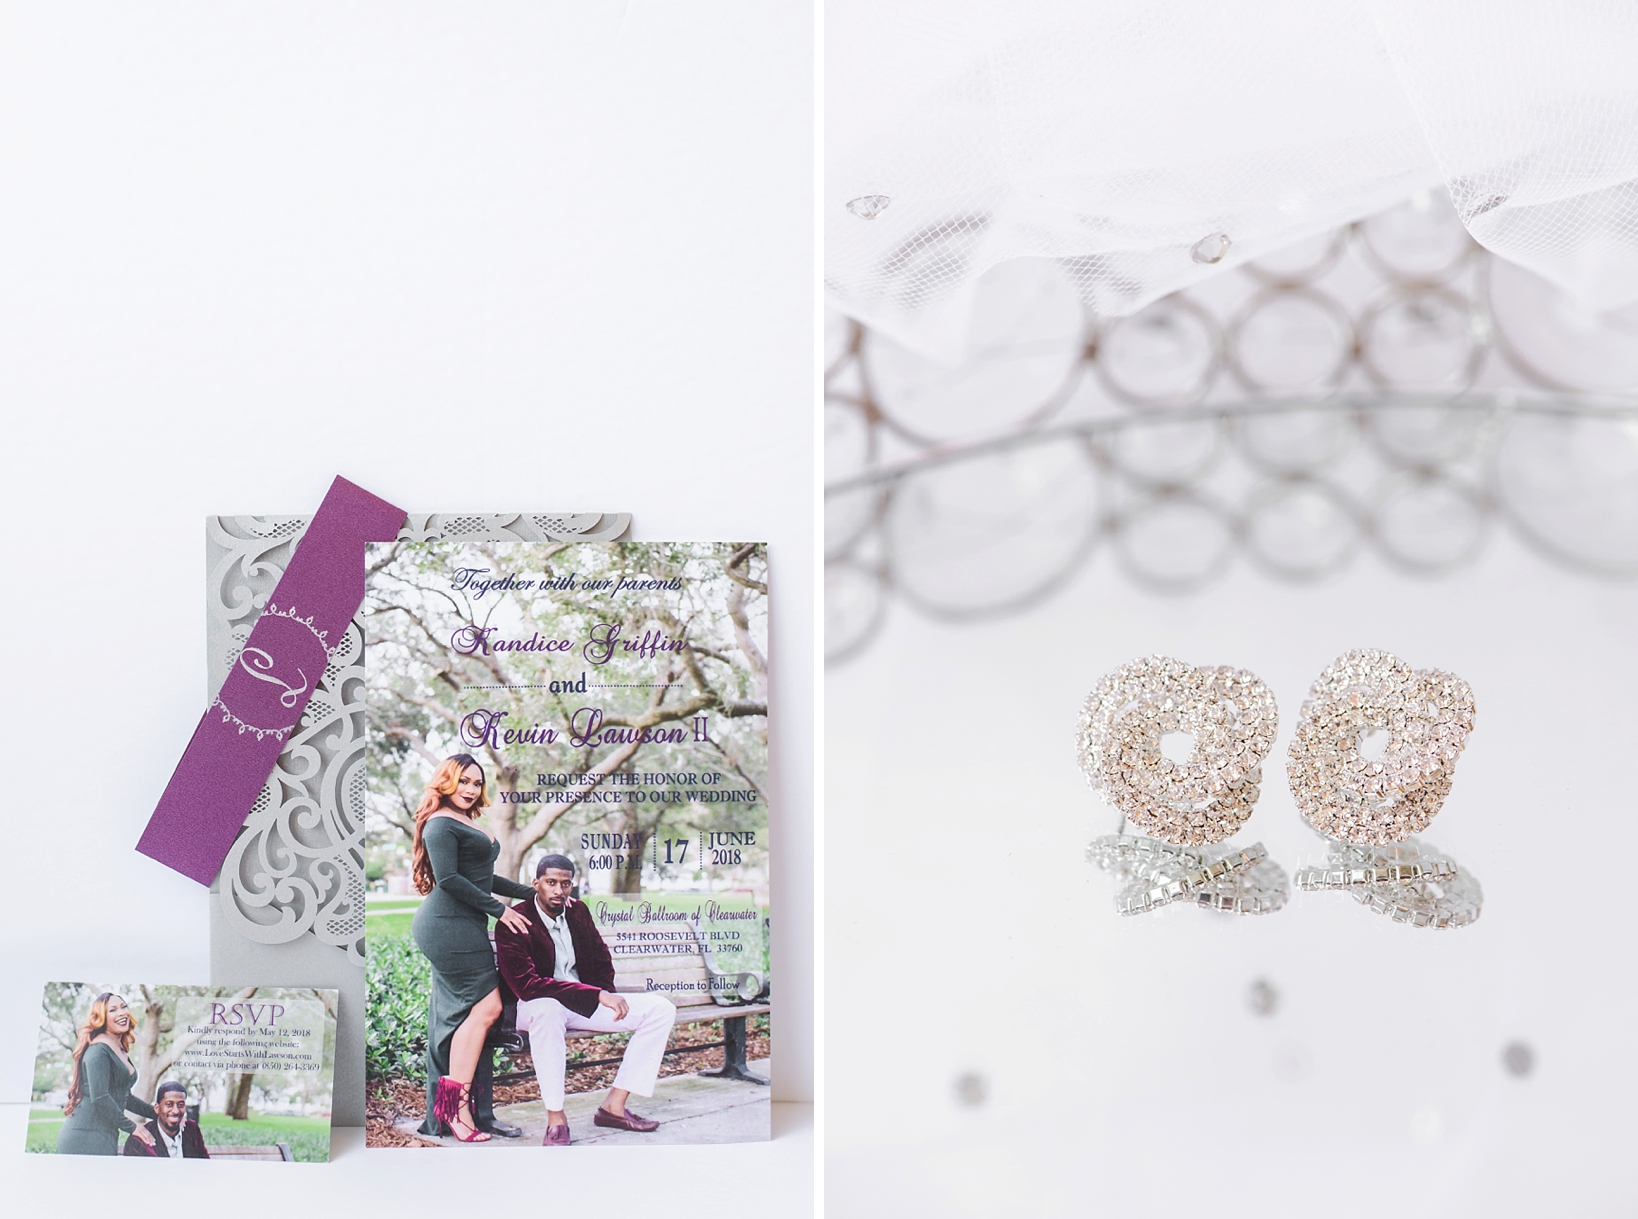 The bride's earrings and wedding invitation suite